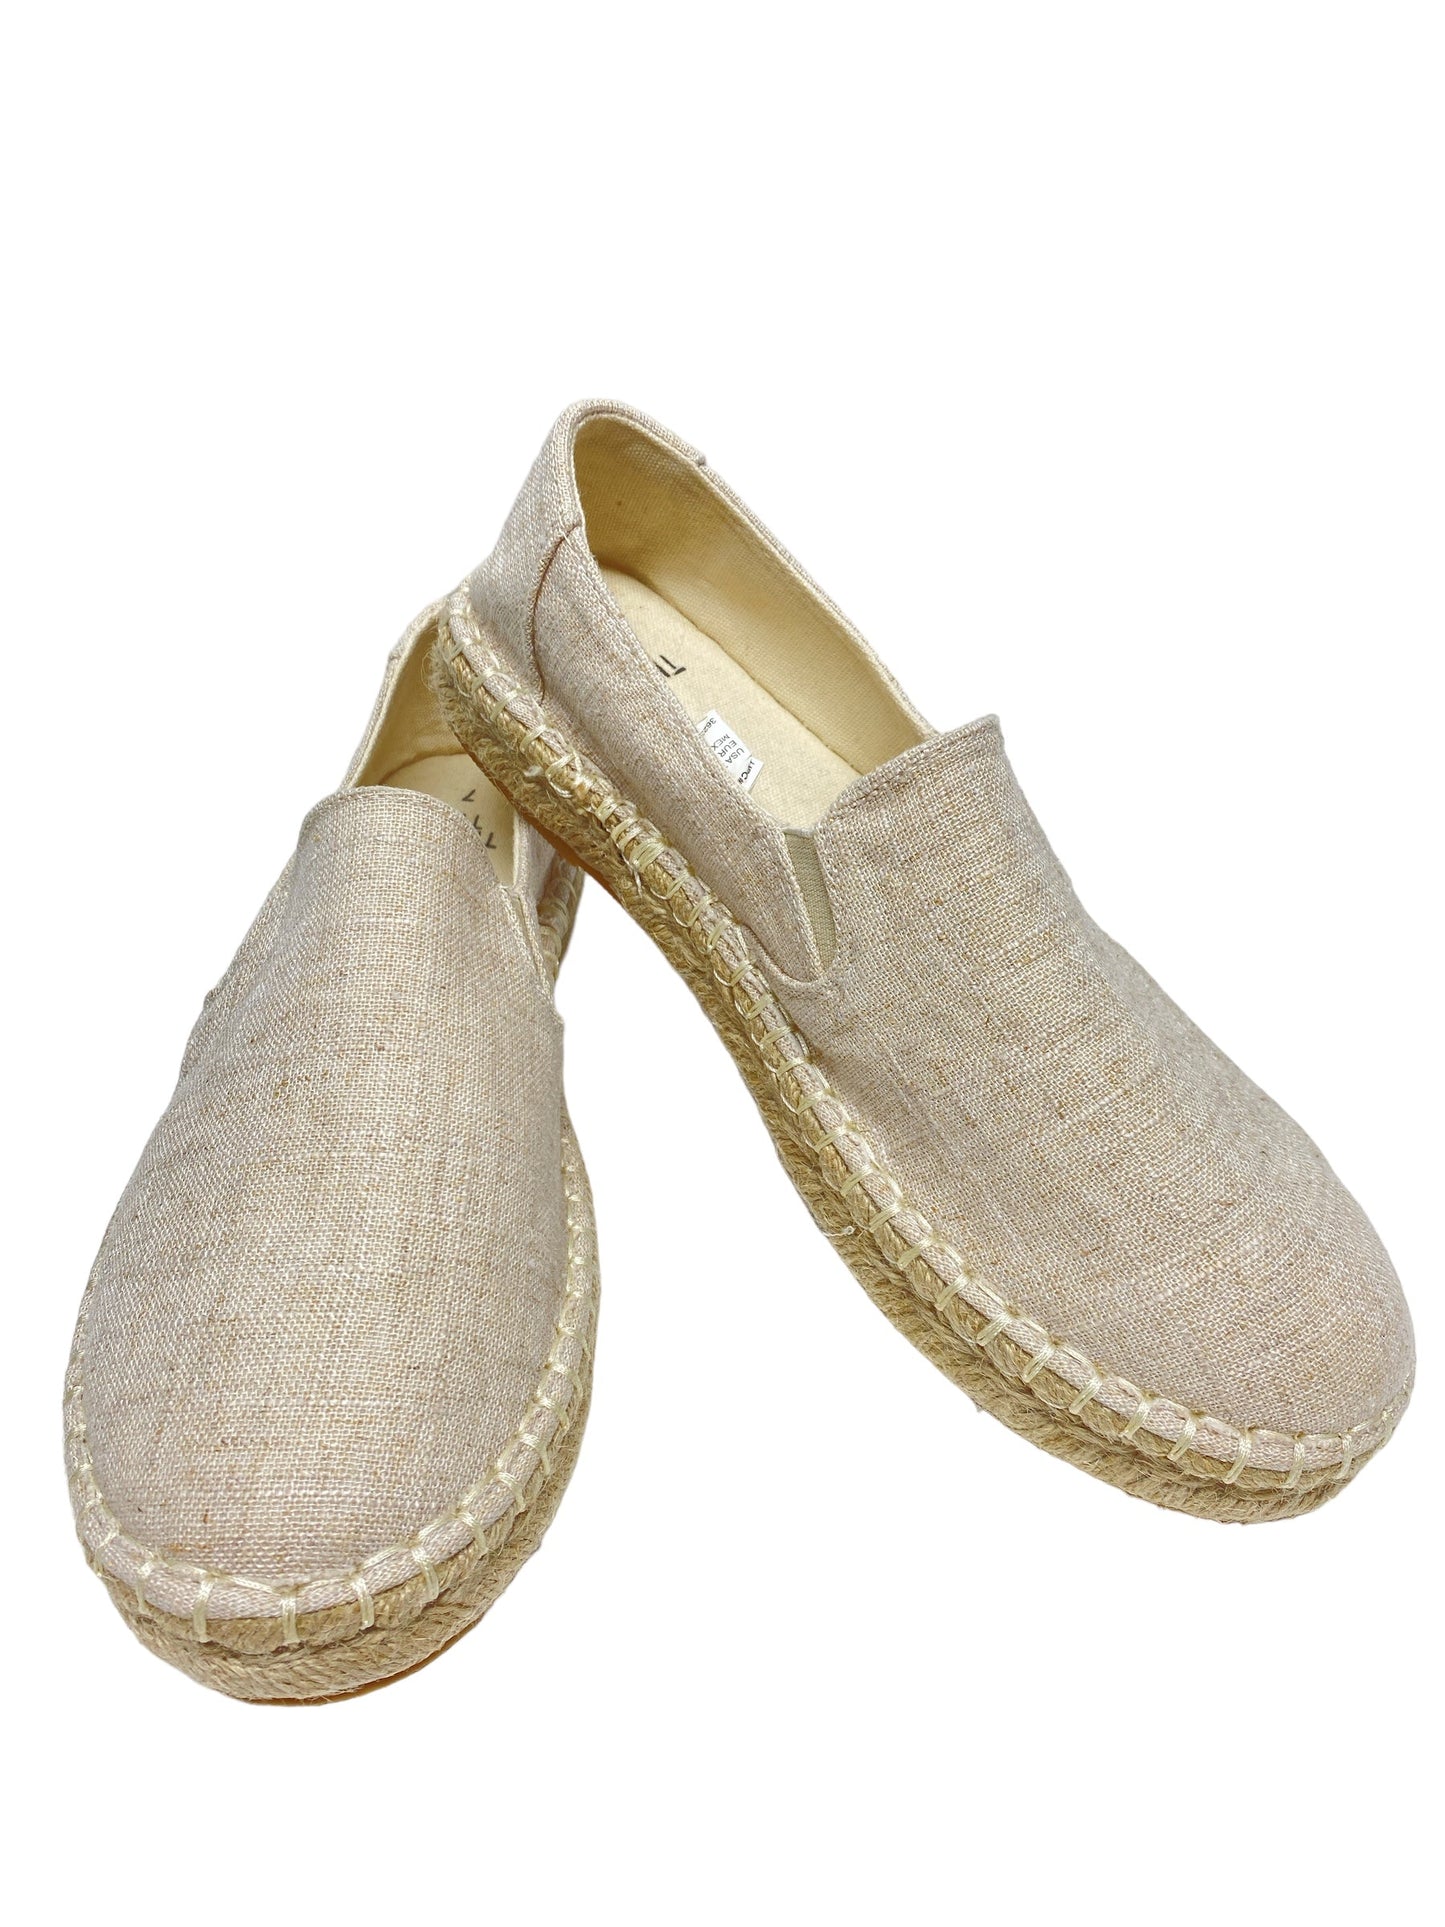 Cream Shoes Flats Time And Tru, Size 7